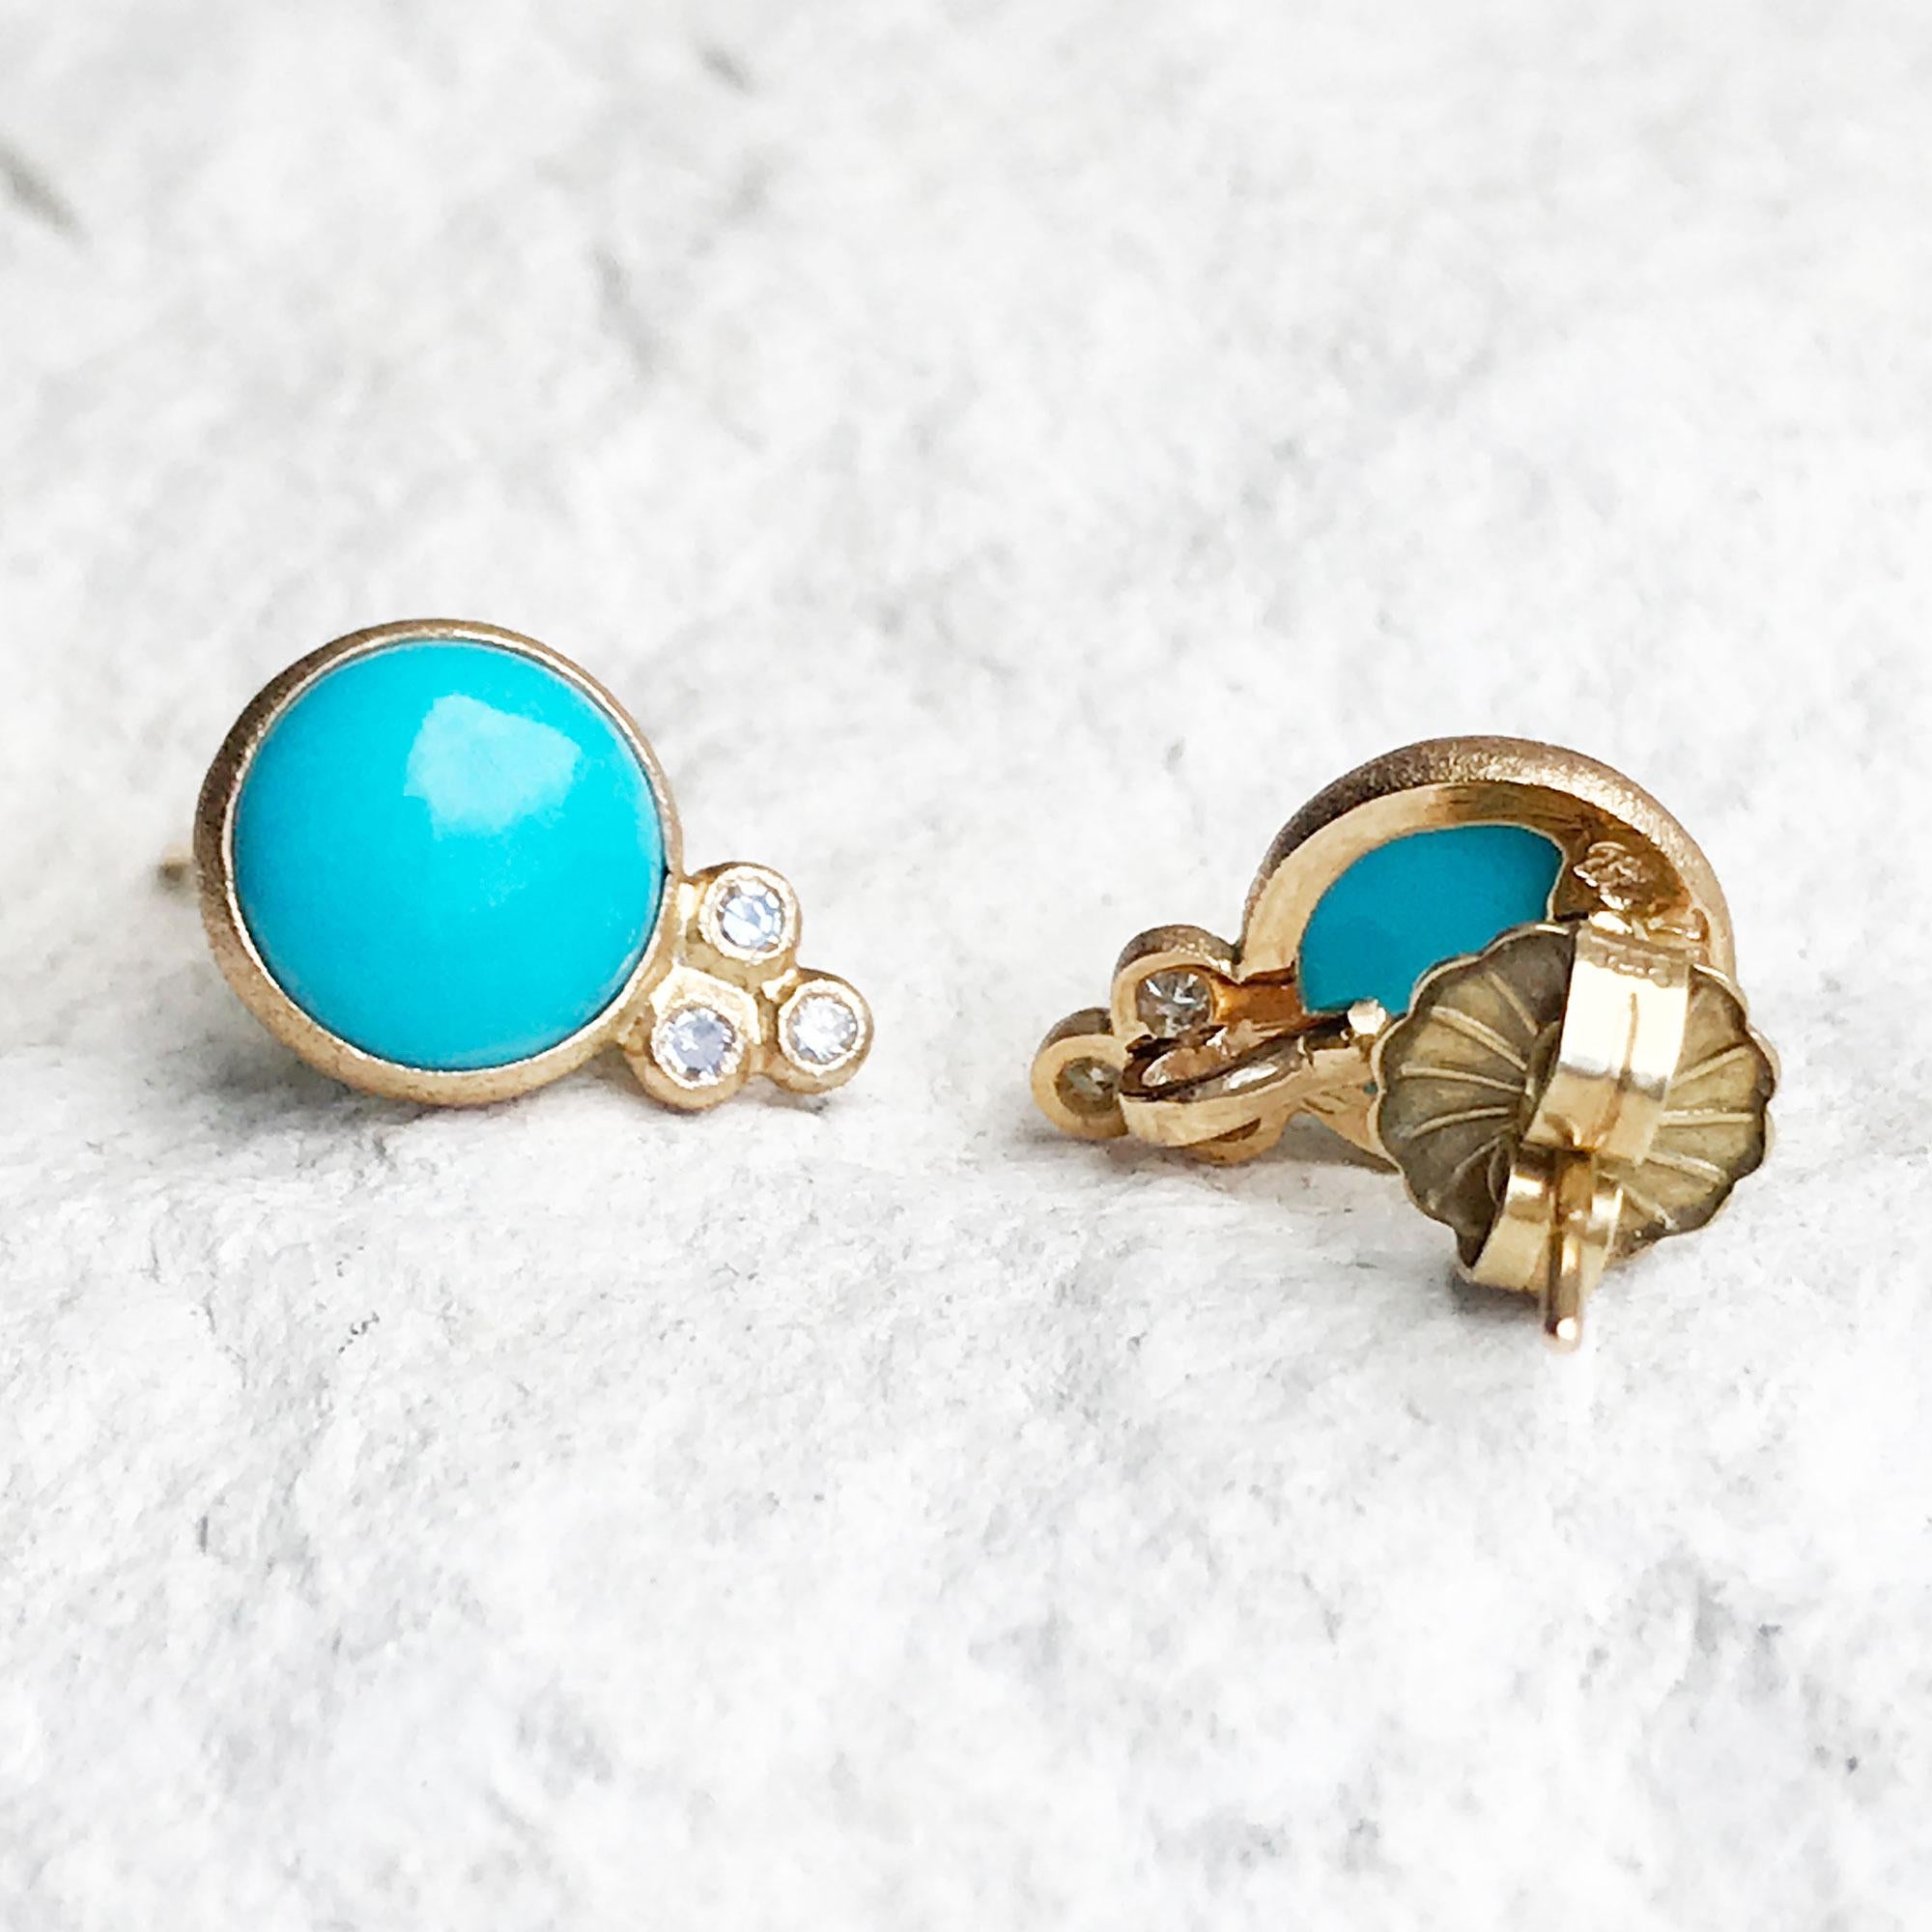 A Nina Nguyen classic: Our Chloe Gold Studs are designed with sleeping beauty turquoise rimmed in gold, and accented with diamonds for some extra sparkle. 

Stone carat: 3.5
Diamond carat: 0.1
Stone size: 8mm

About the stones:
Turquoise is an